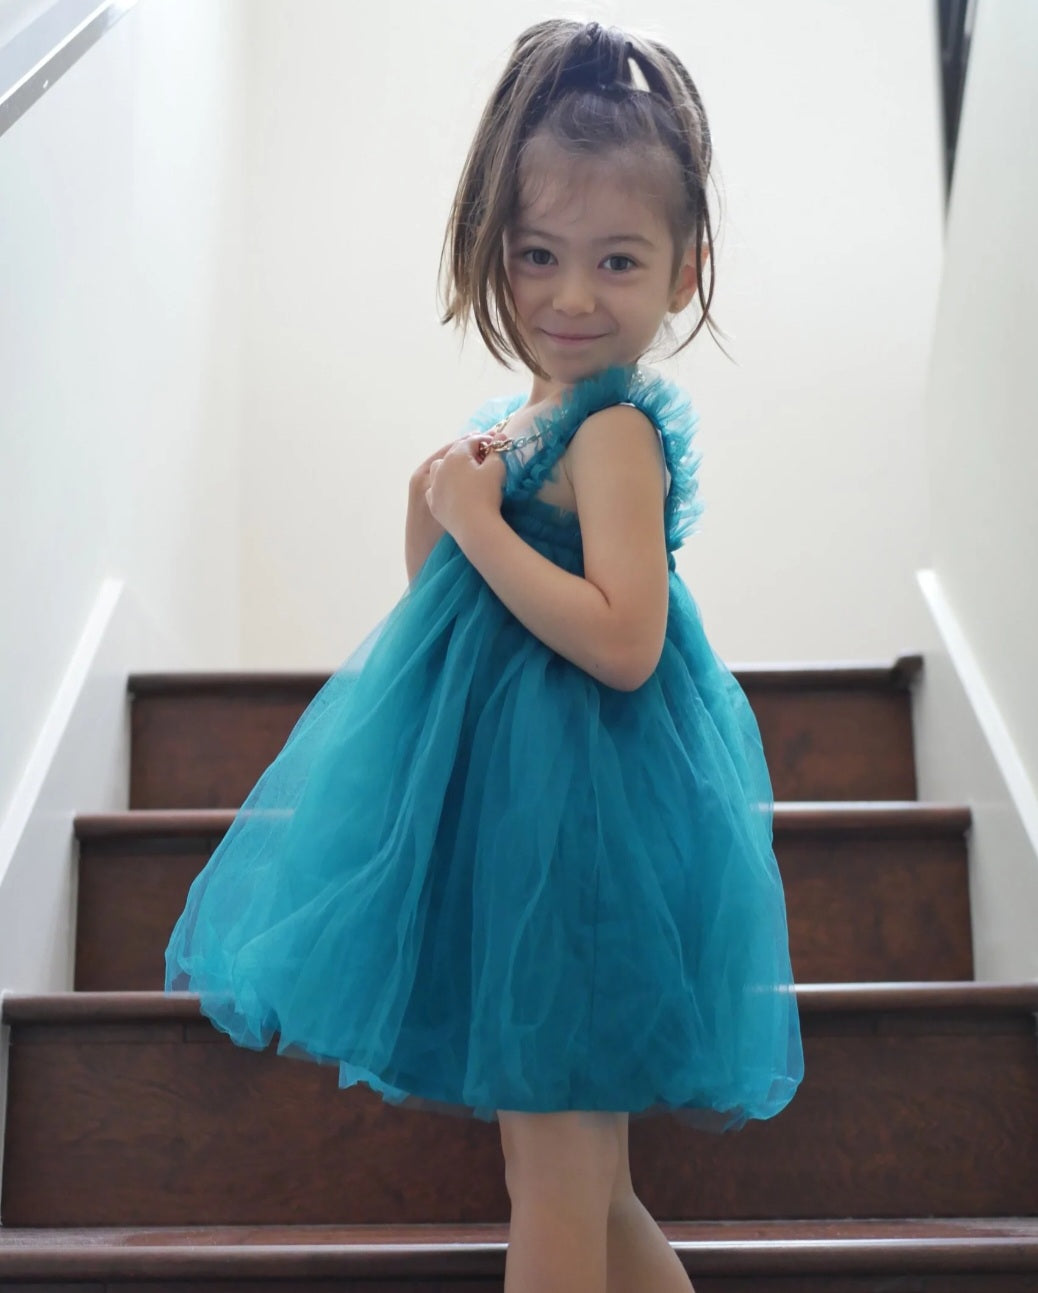 Turquoise Tulle Dress